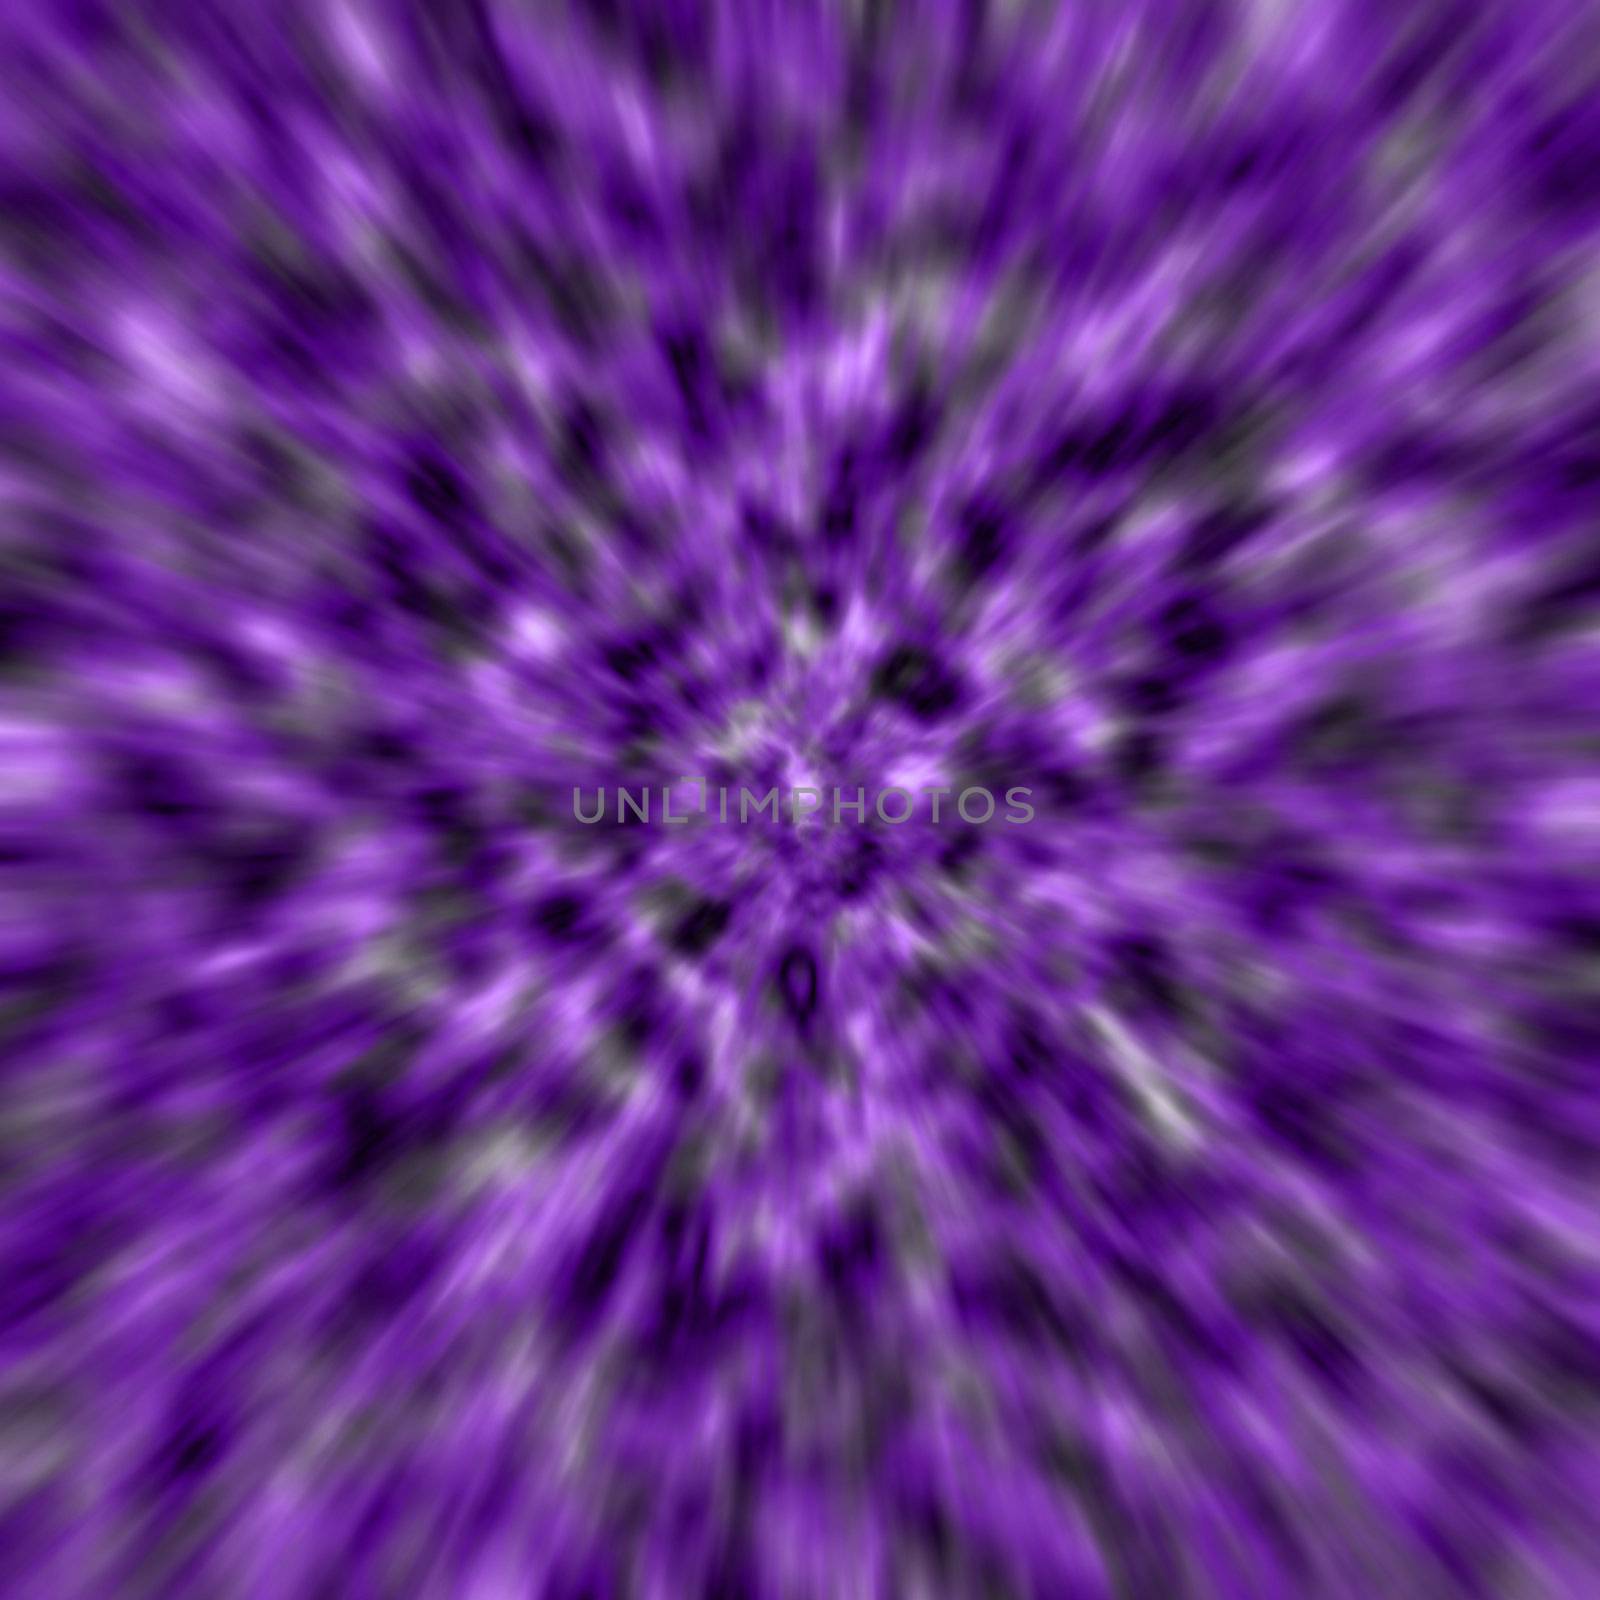 purple zoom blur -abstract background